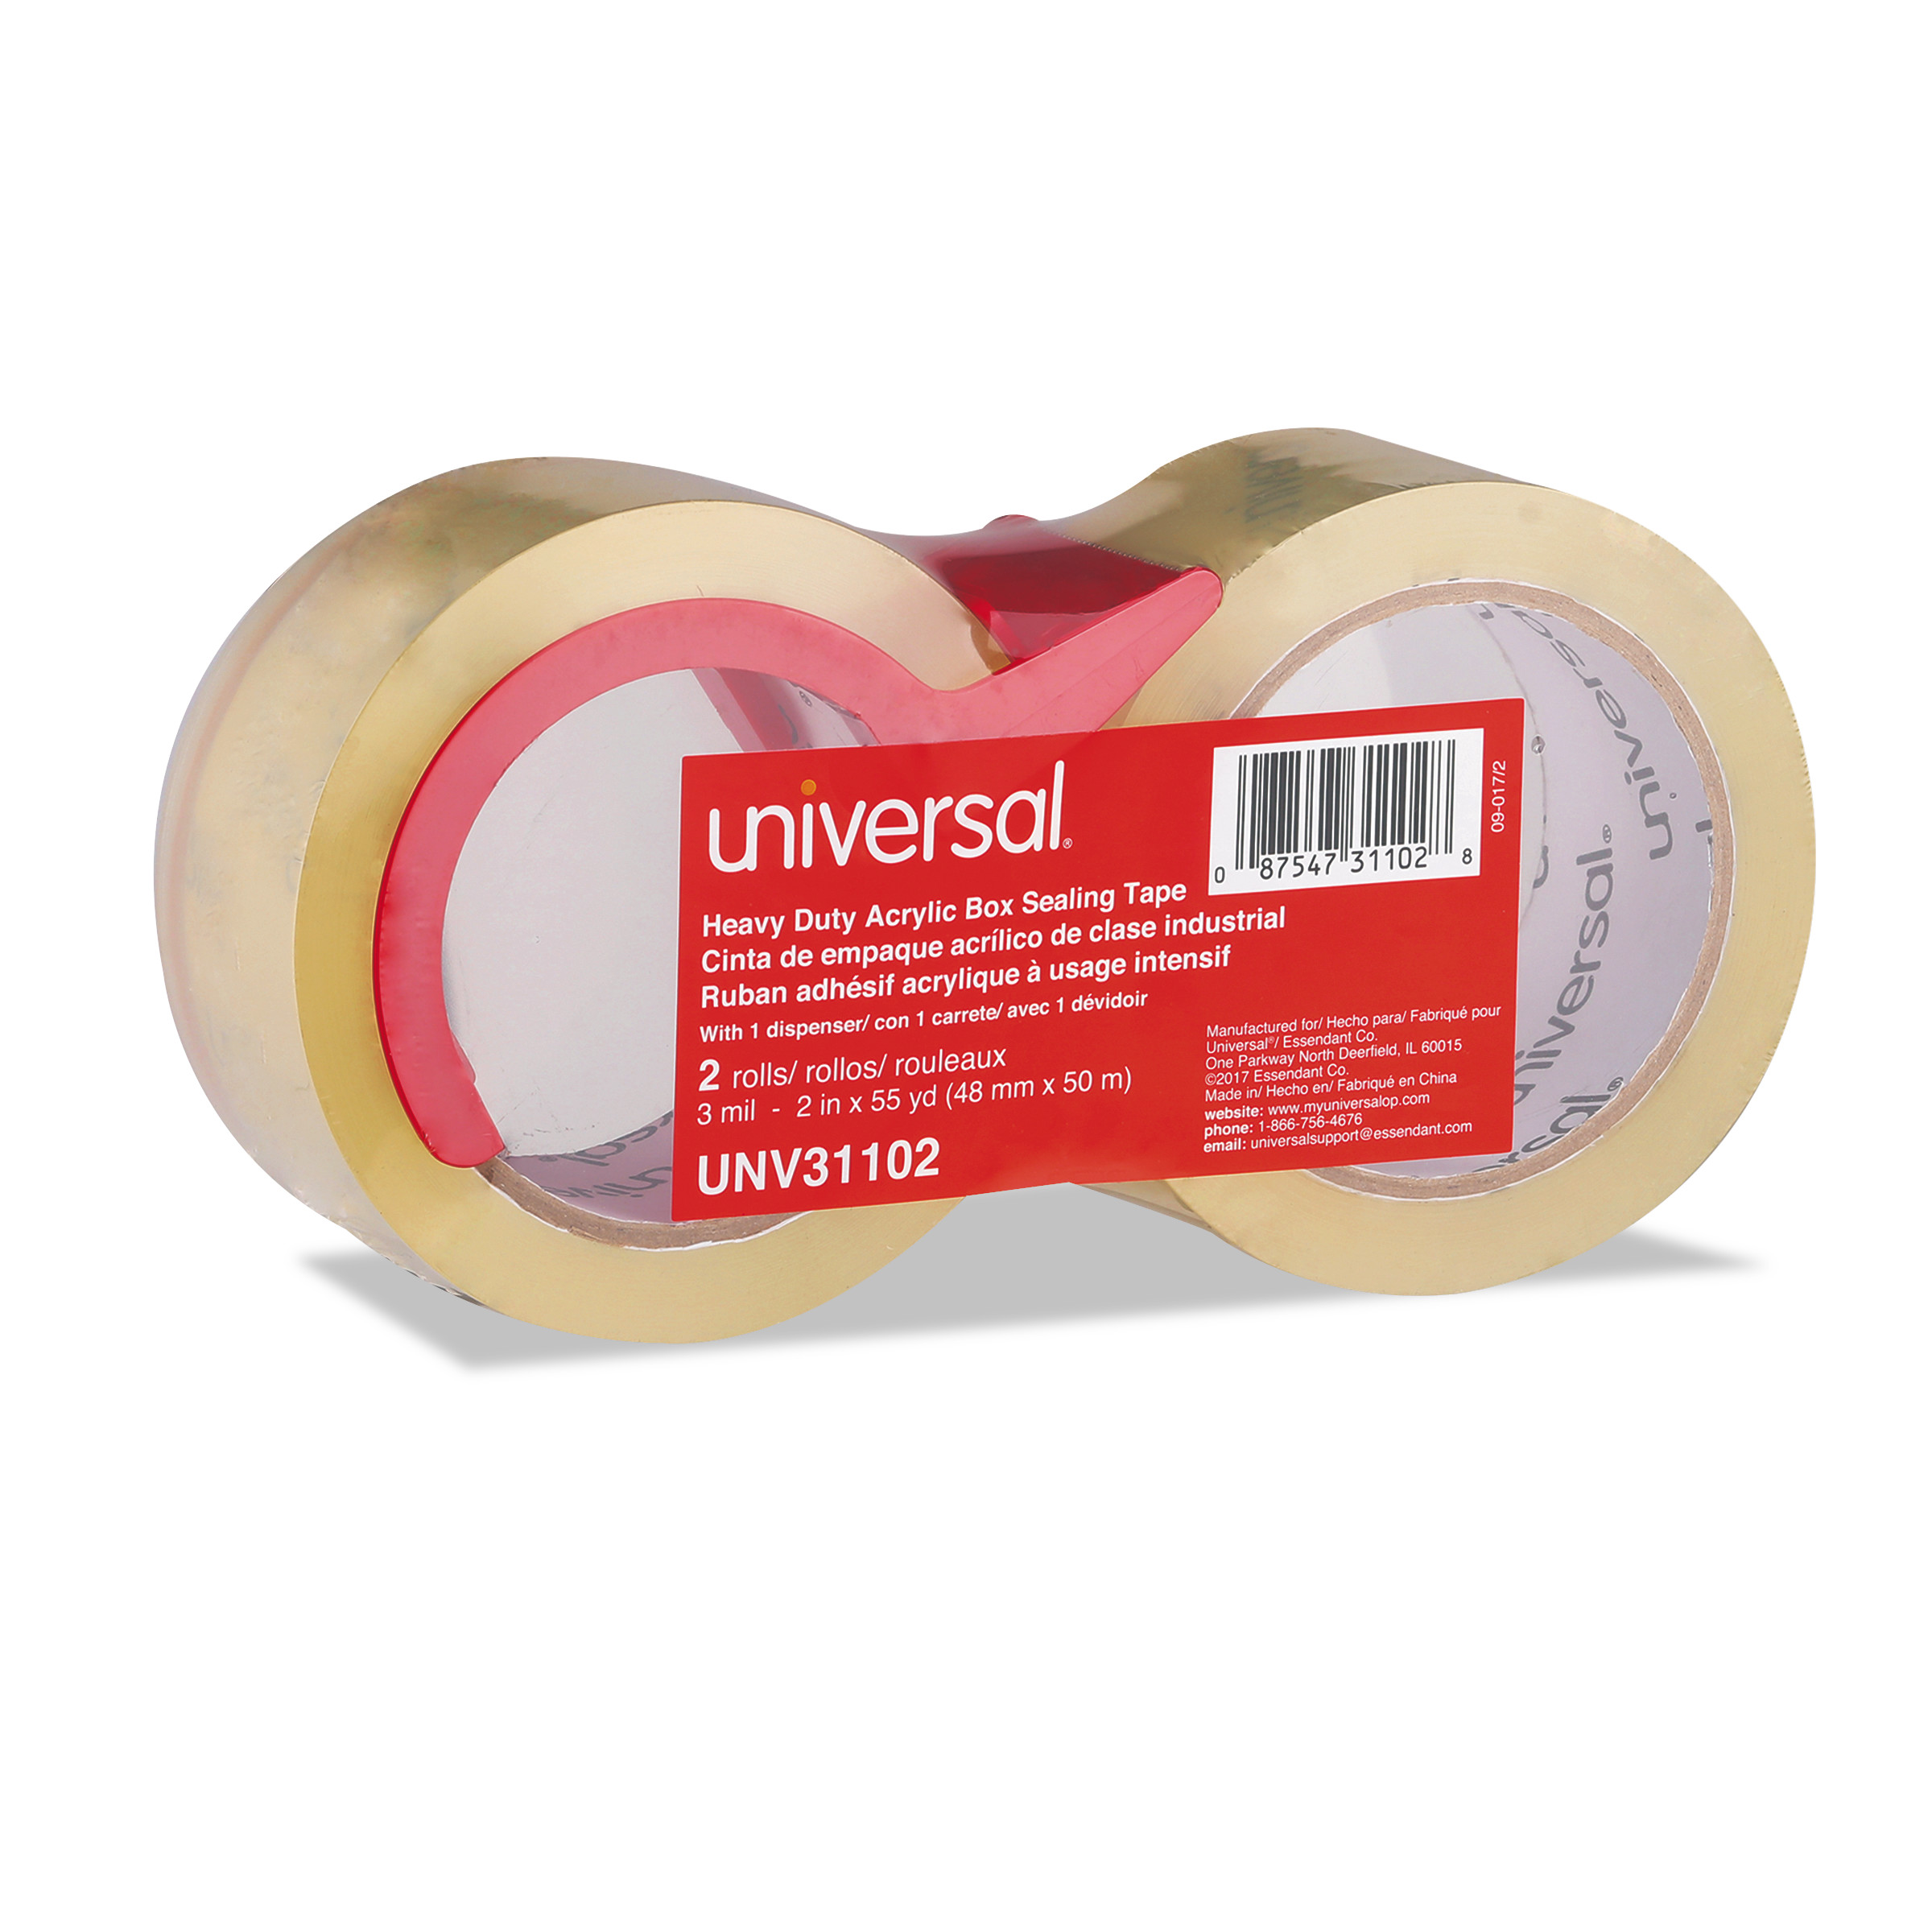  Universal UNV31102 Heavy-Duty Acrylic Box Sealing Tape with Dispenser, 3 Core, 1.88 x 54.6 yds, Clear, 2/Pack (UNV31102) 